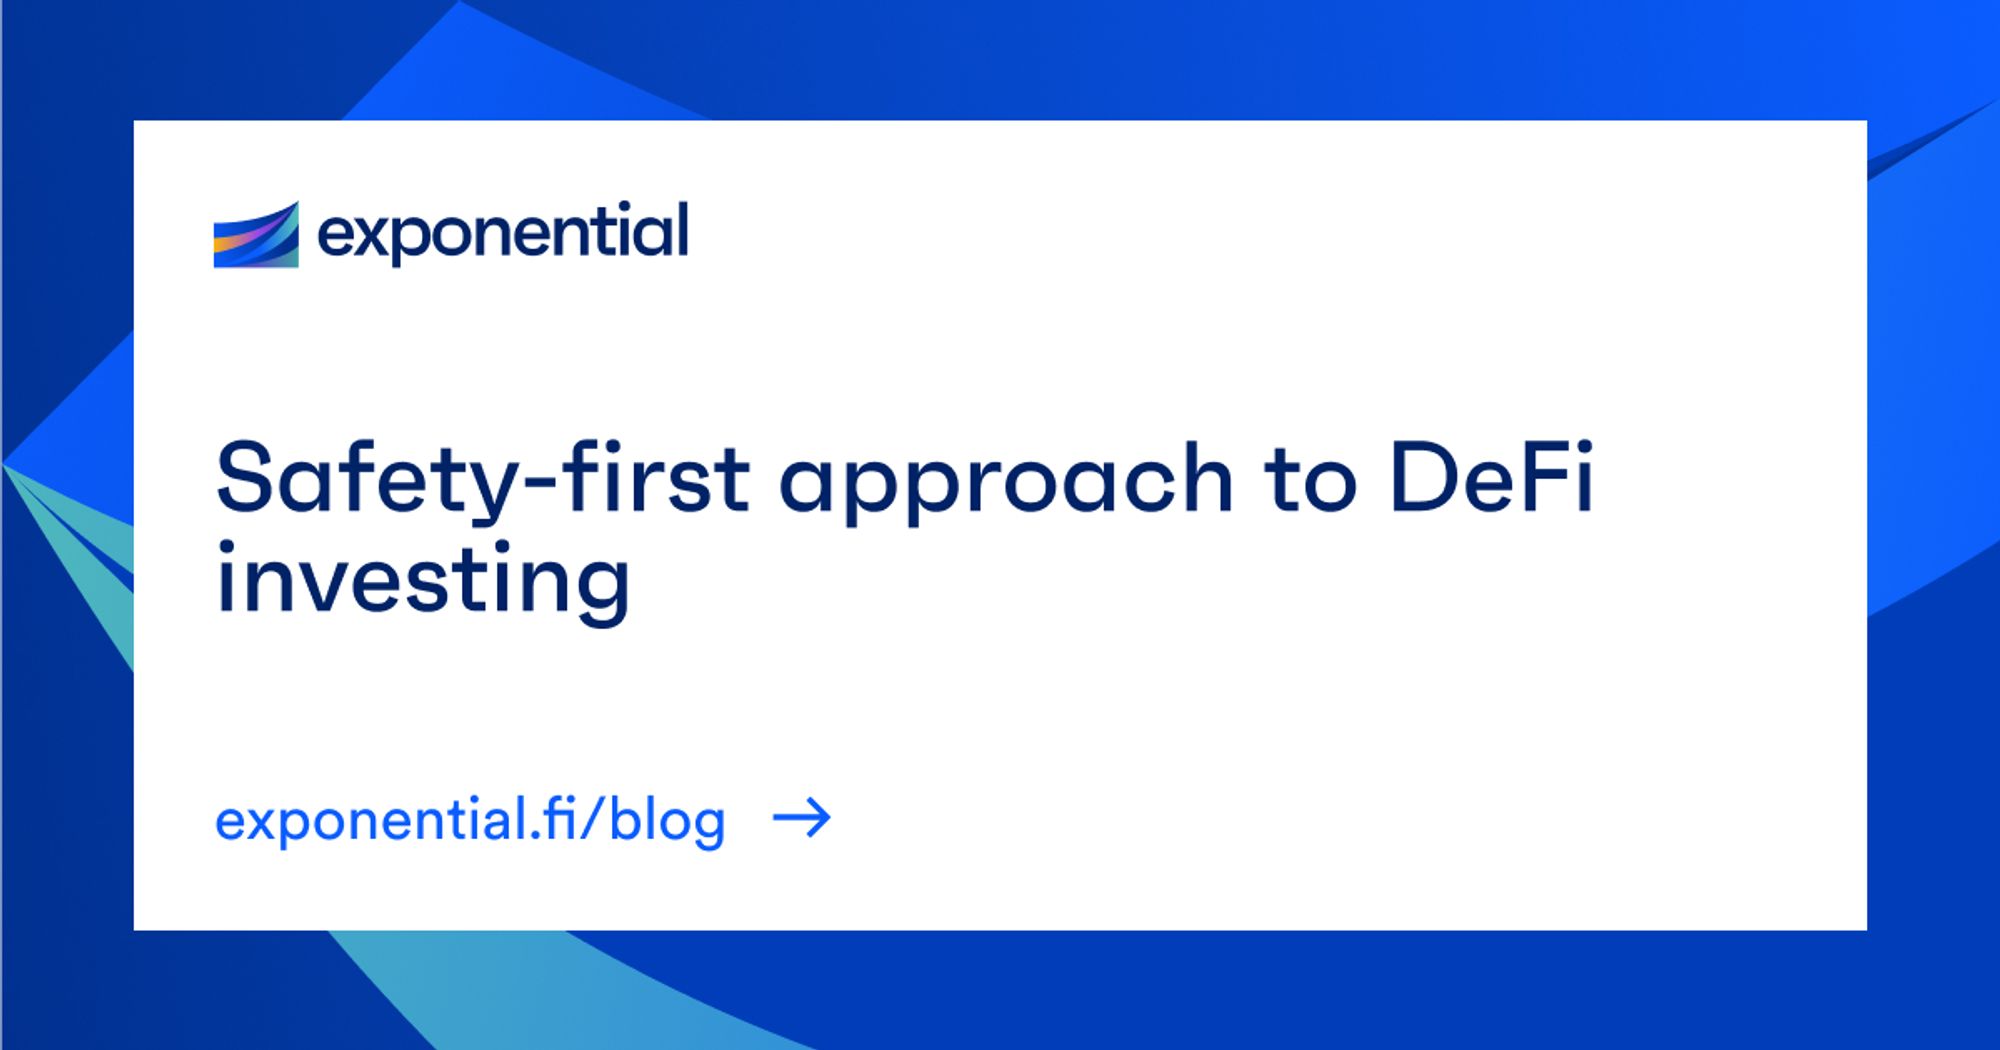 Header image for the article Exponential’s safety-first approach to DeFi investing